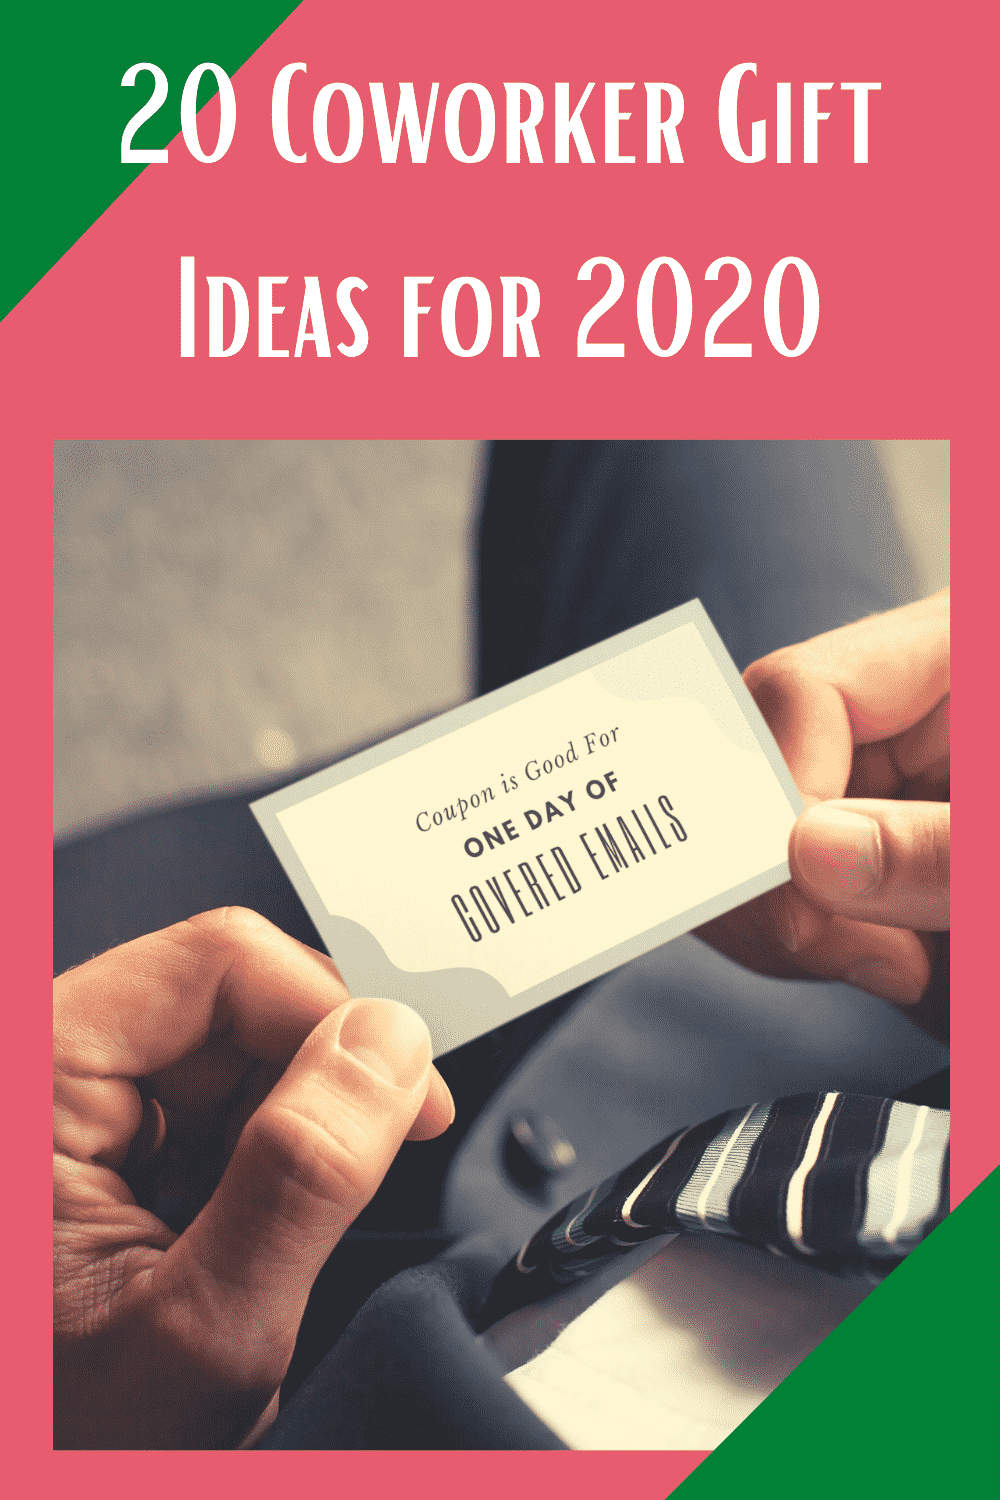 20 Coworker Gift Ideas for 2020